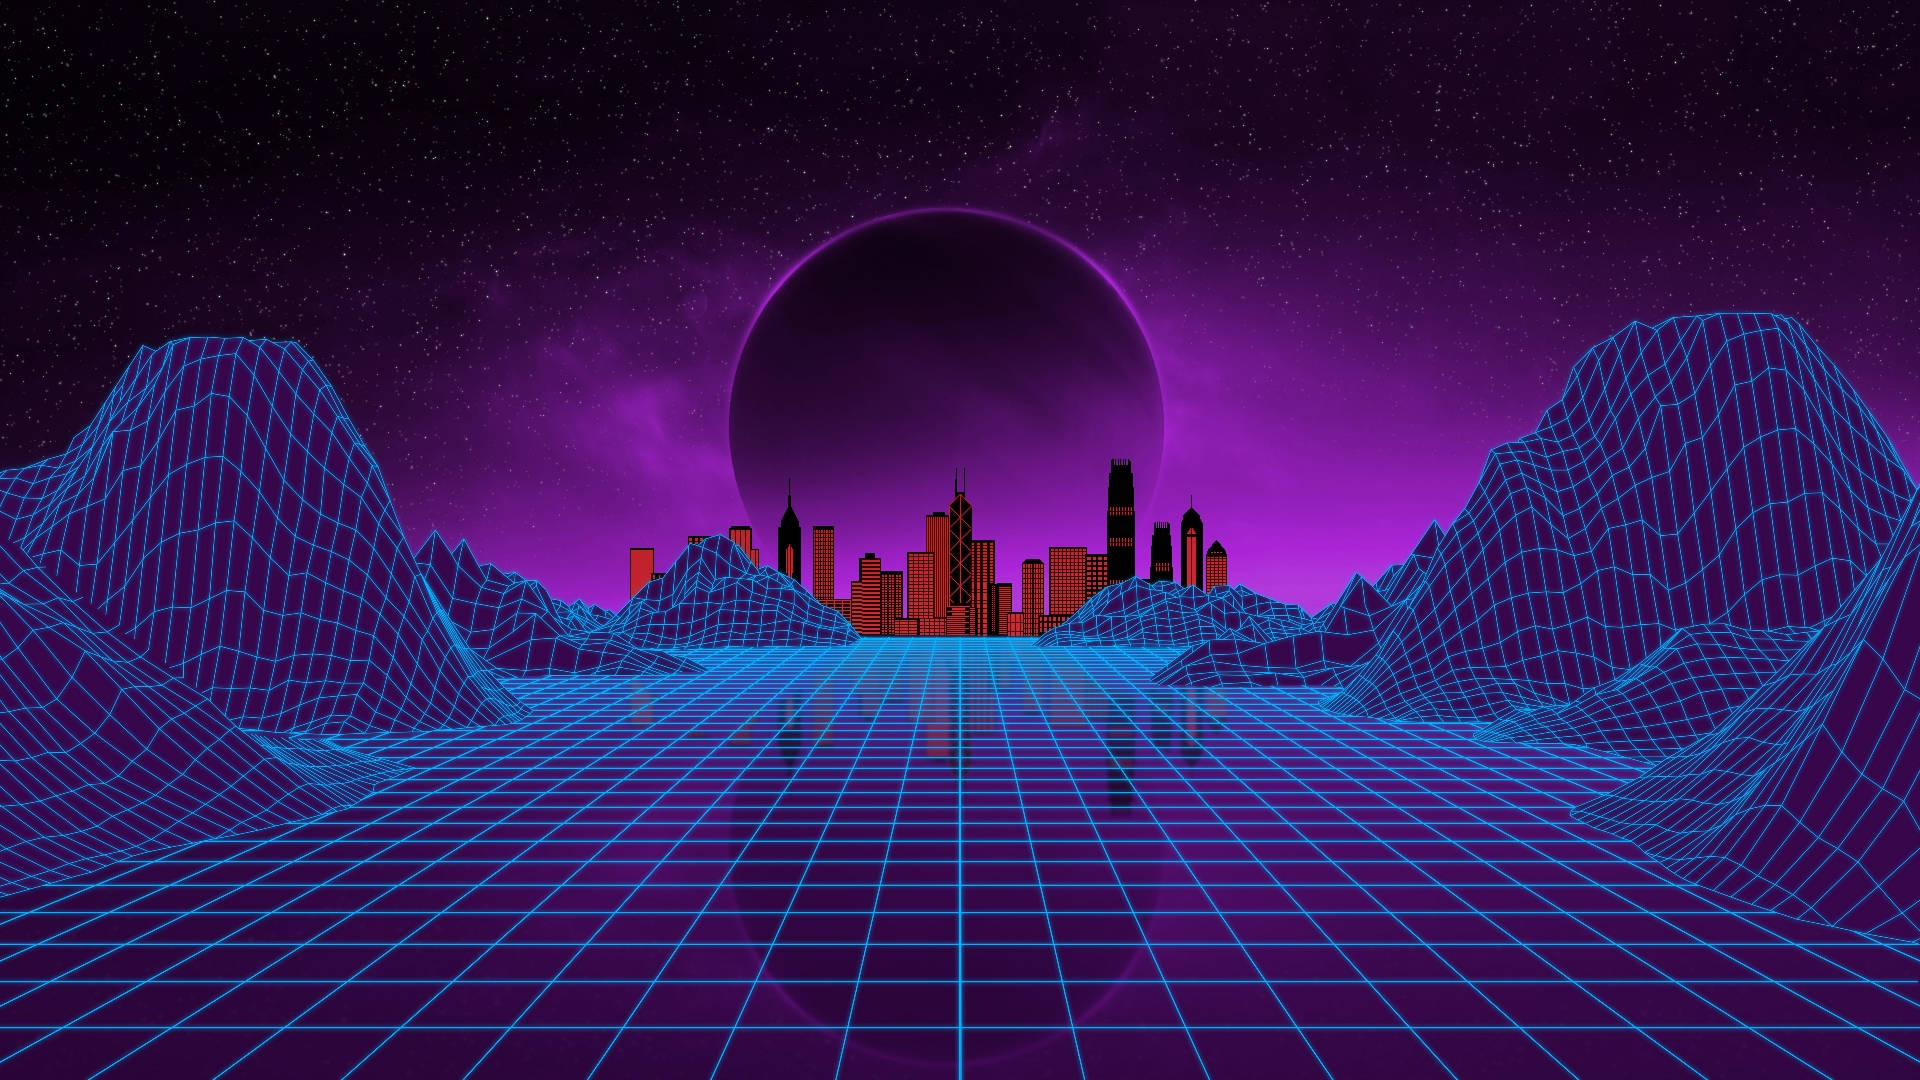 "The glowing neon lights paint the retro-futuristic skyline of the valley city" Wallpaper